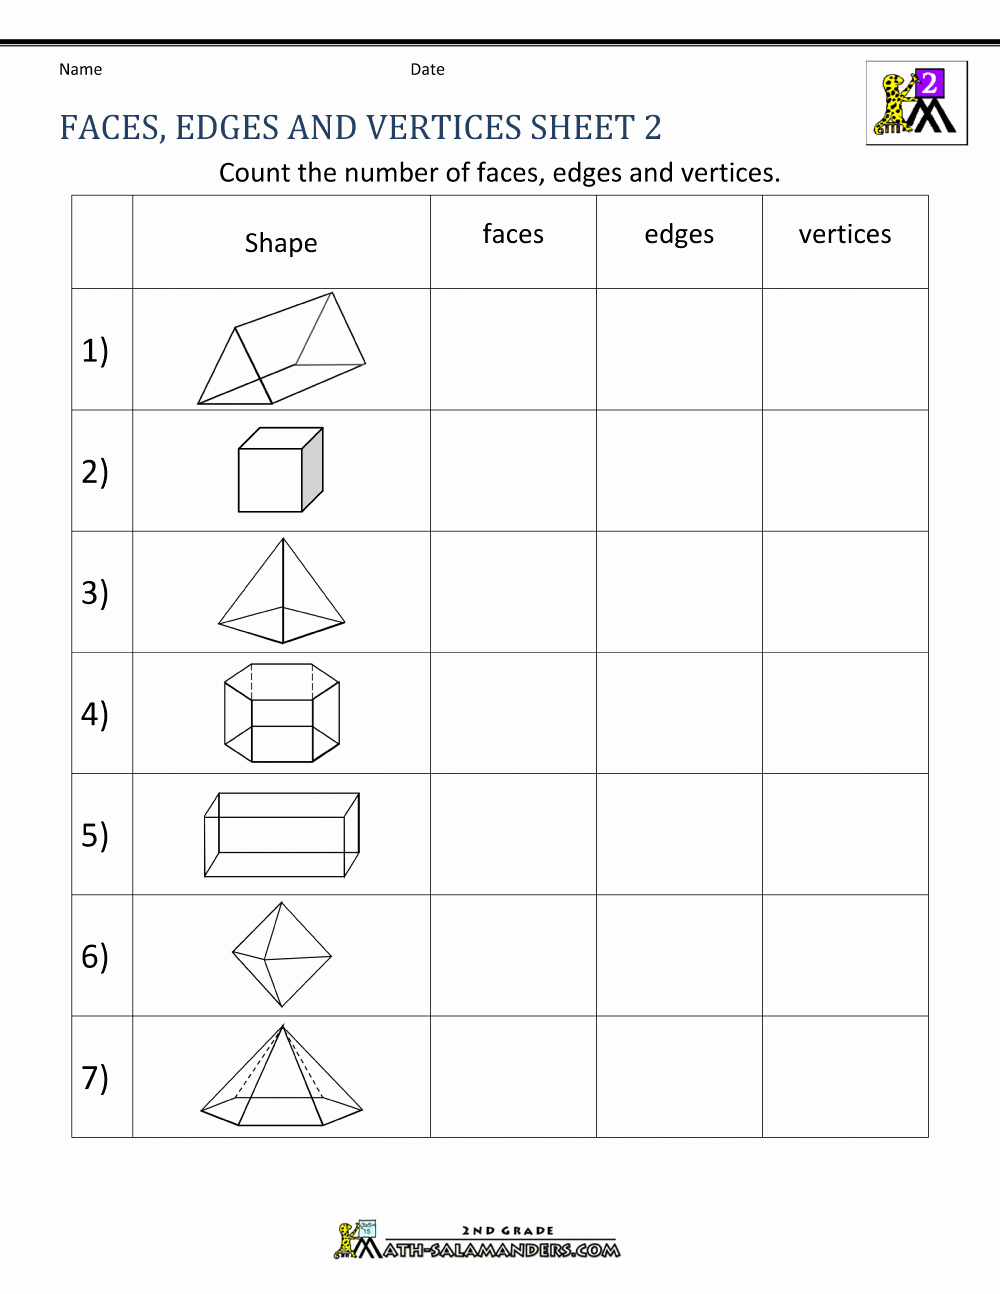 3d Shapes Worksheets 2nd Grade Awesome 72 Math Worksheets for Grade 2 3d Shapes Kidworksheet